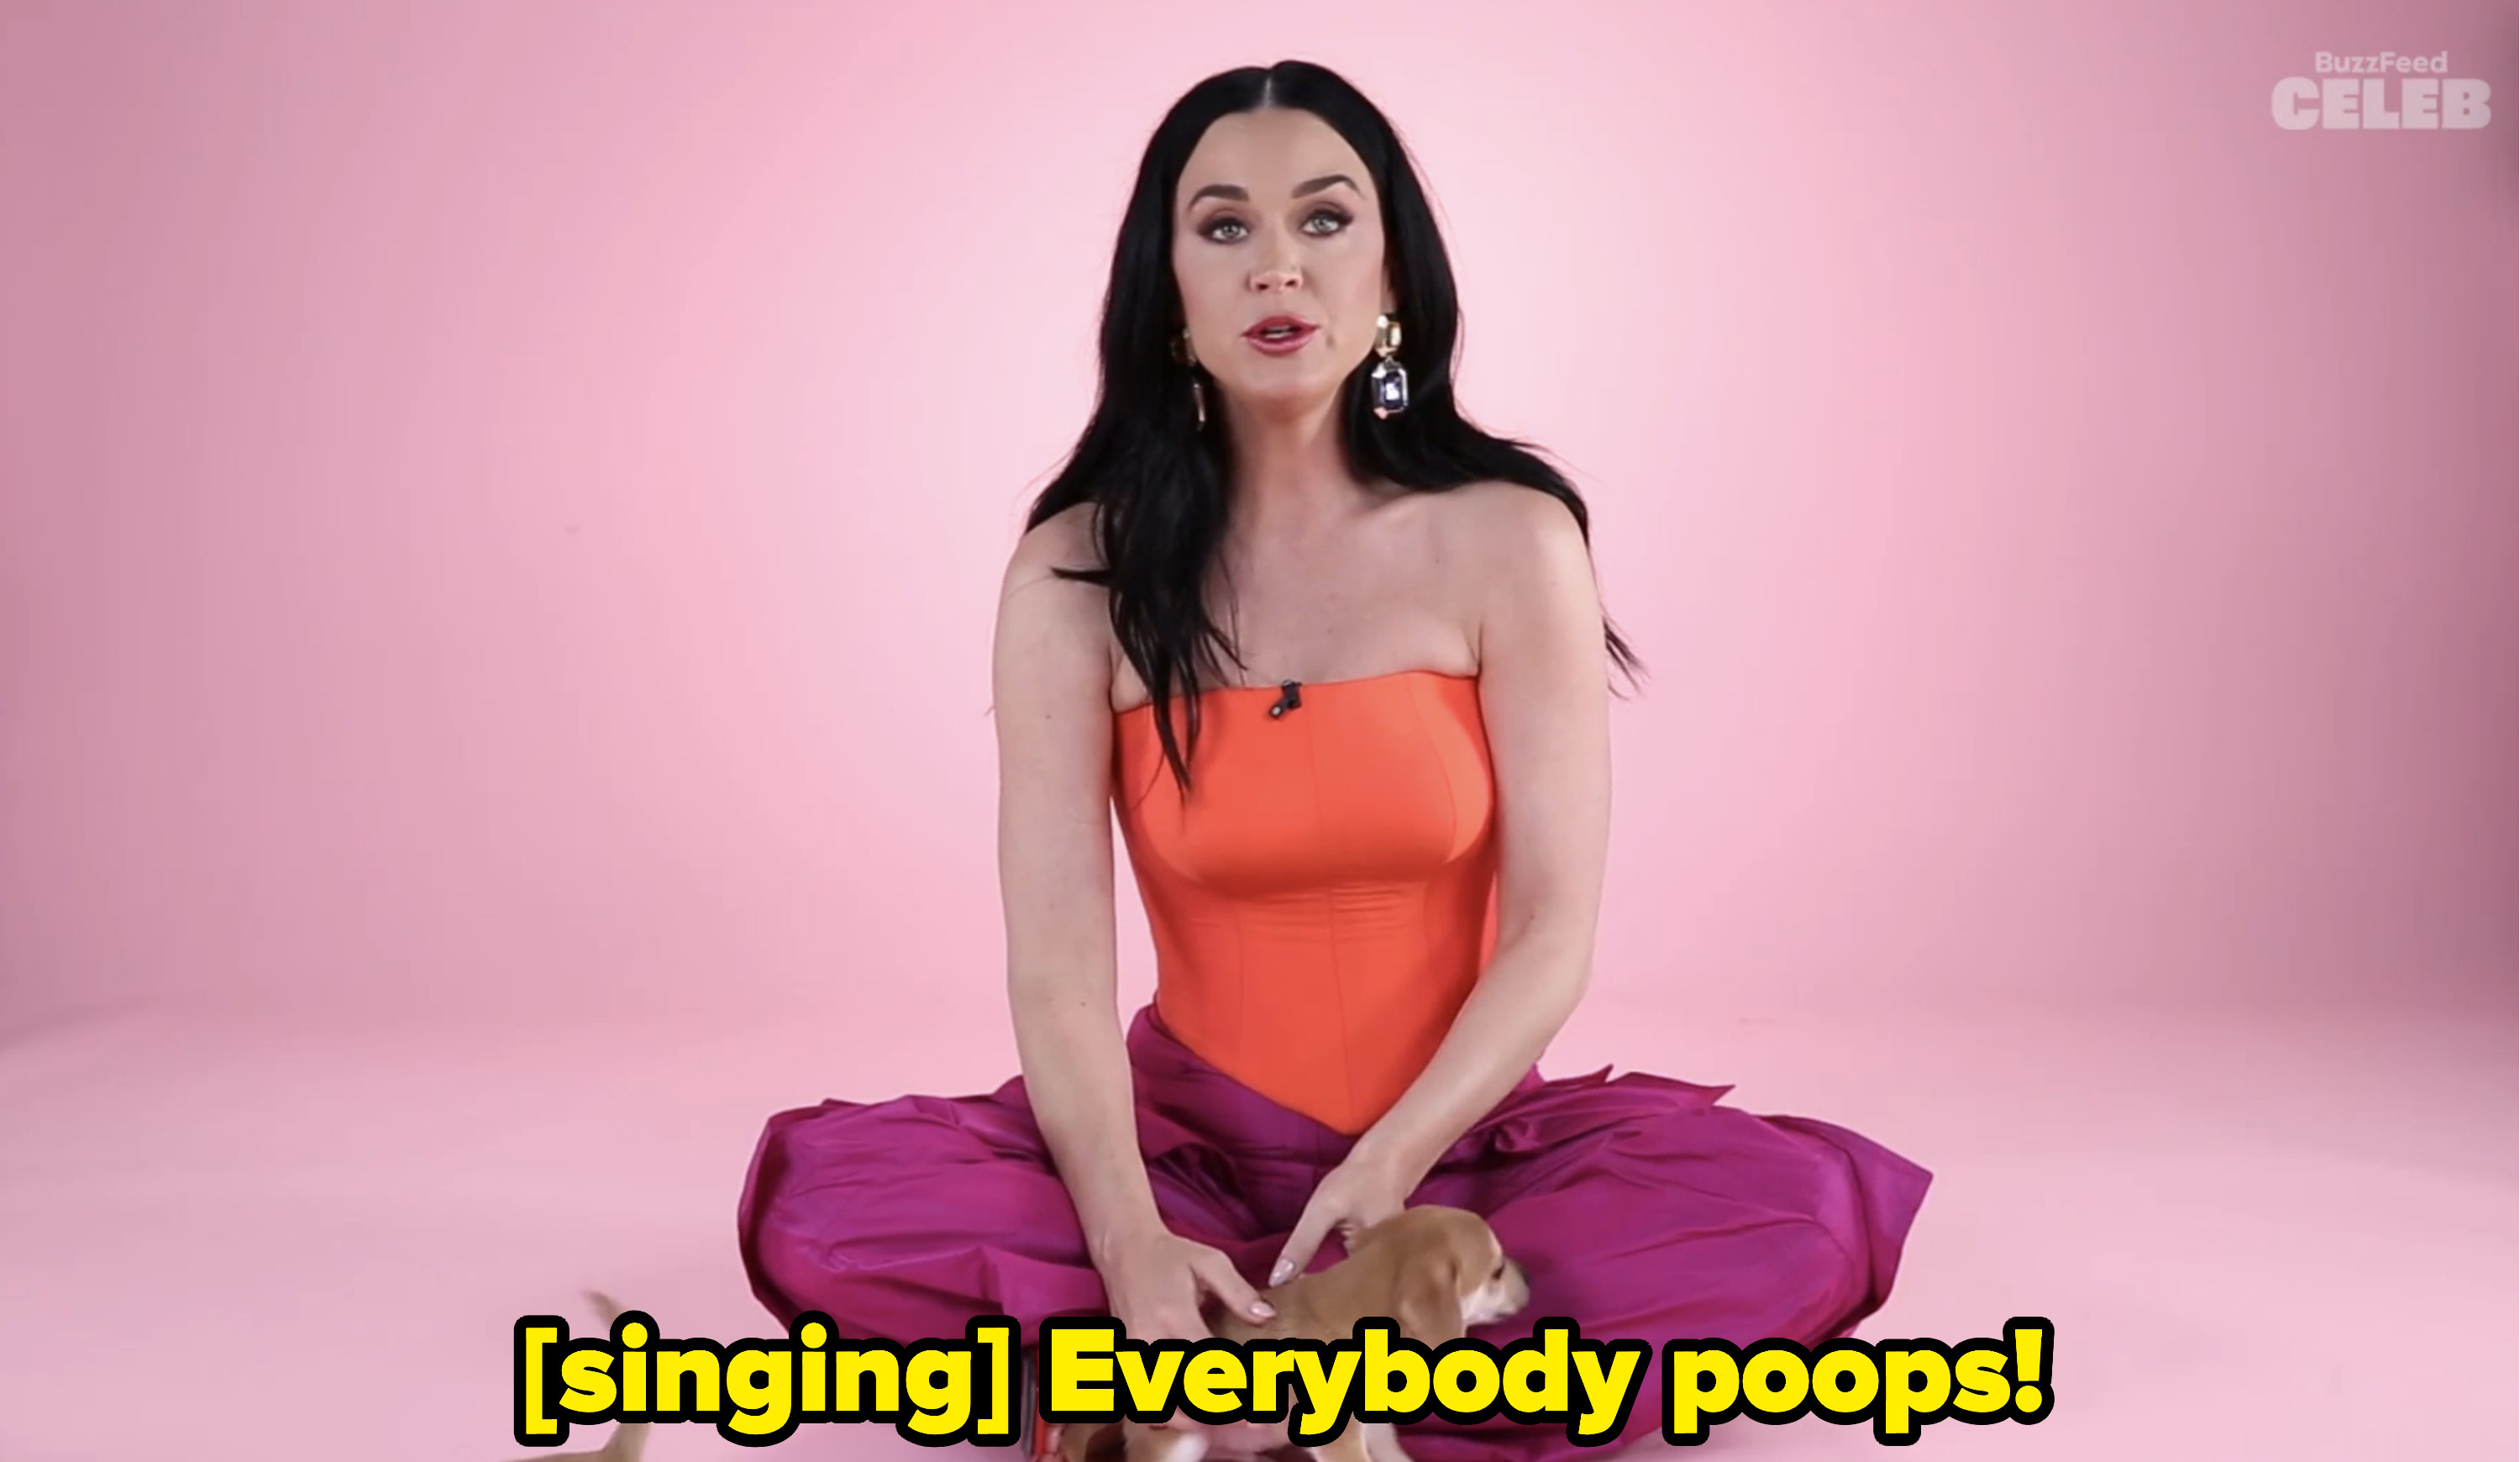 Katy Perry singing, &quot;Everybody poops!&quot;